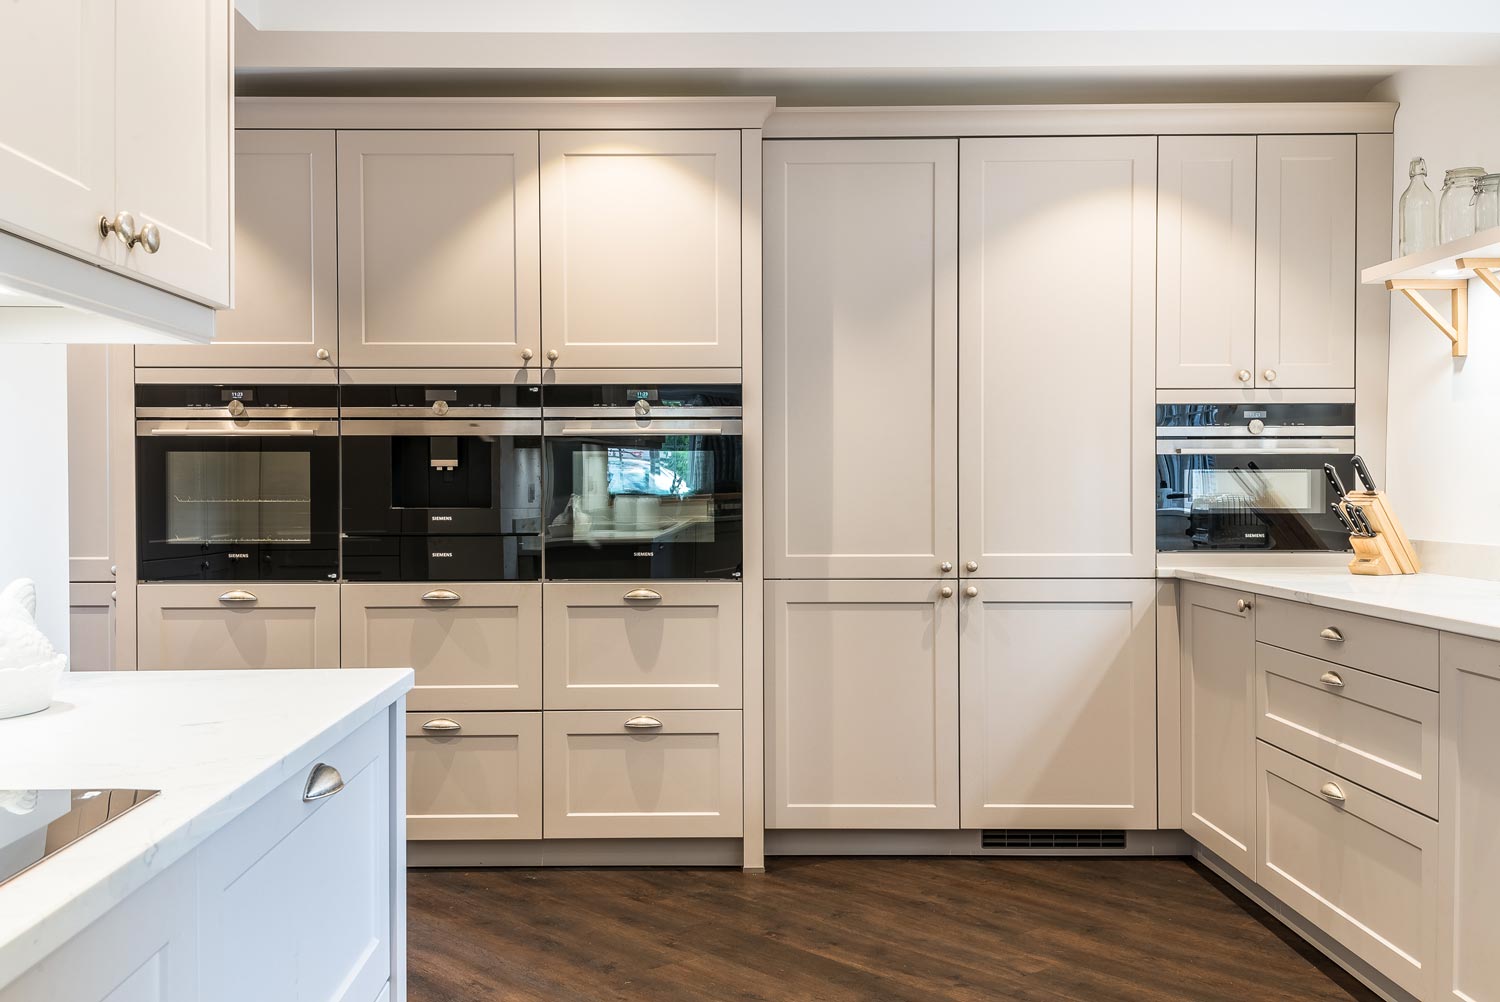 KBD - Signature Kitchen by Design, Martin and Tracy case study